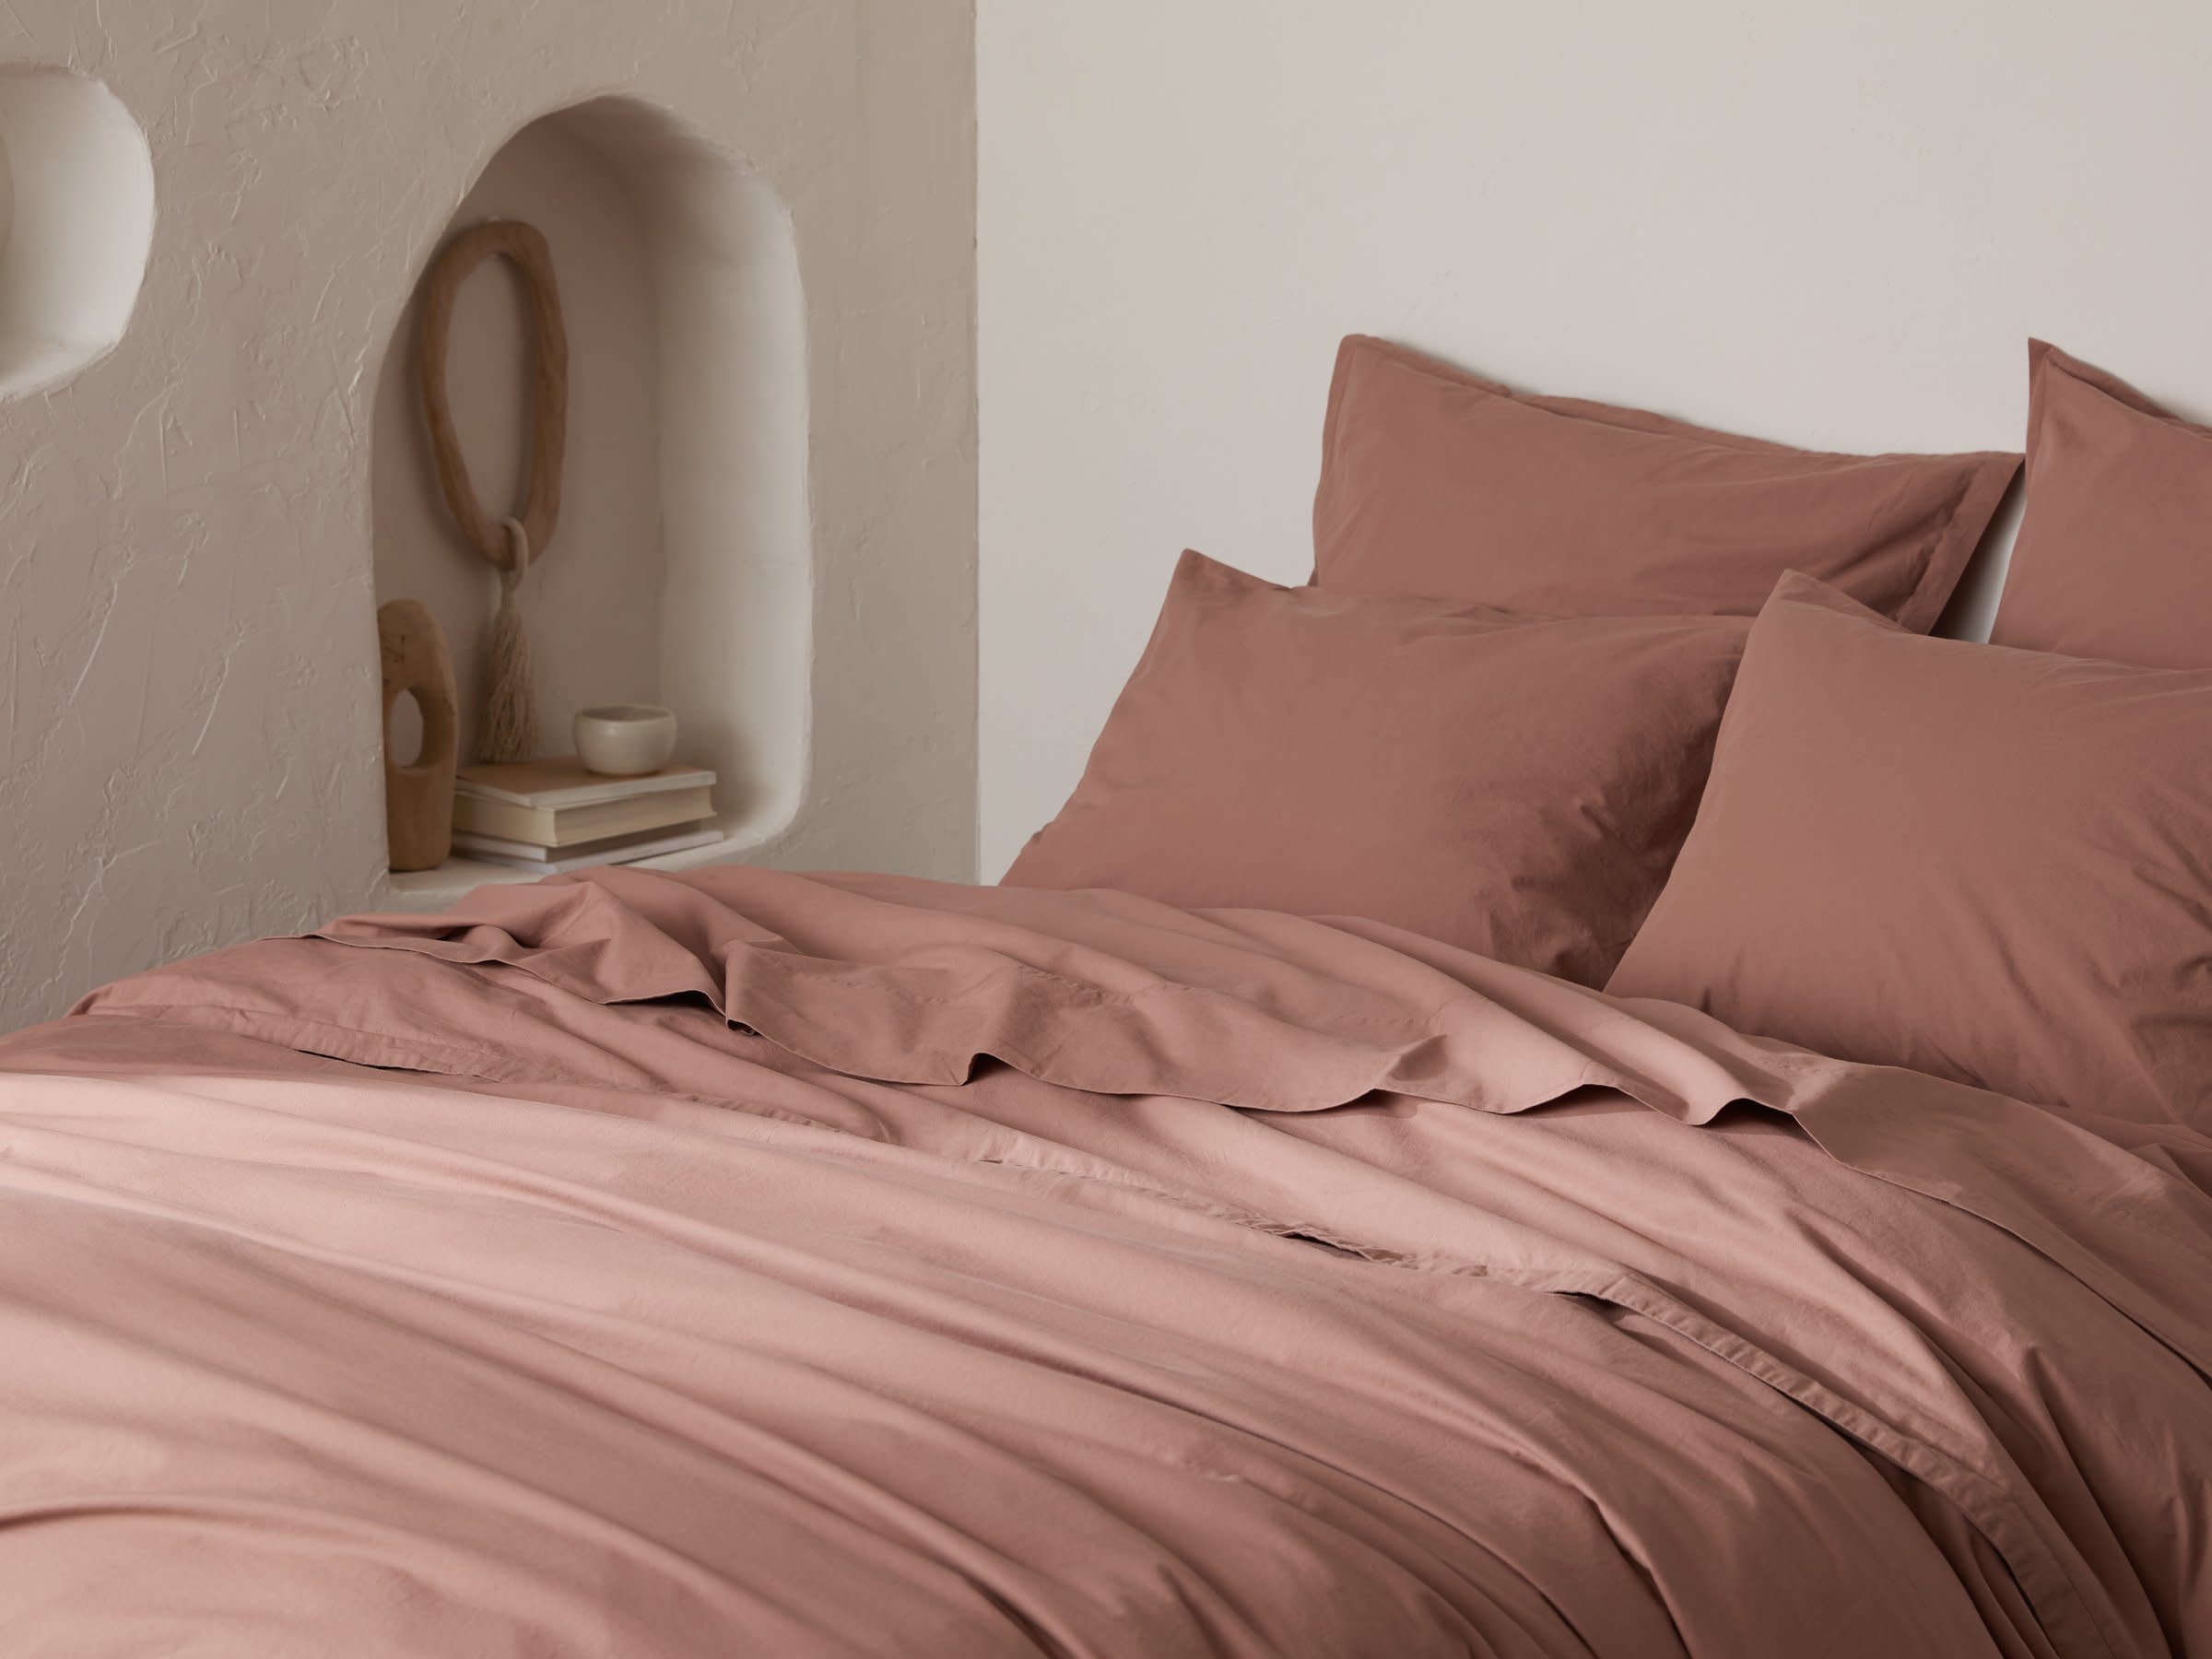 Clay Percale Duvet Cover Shown In A Room